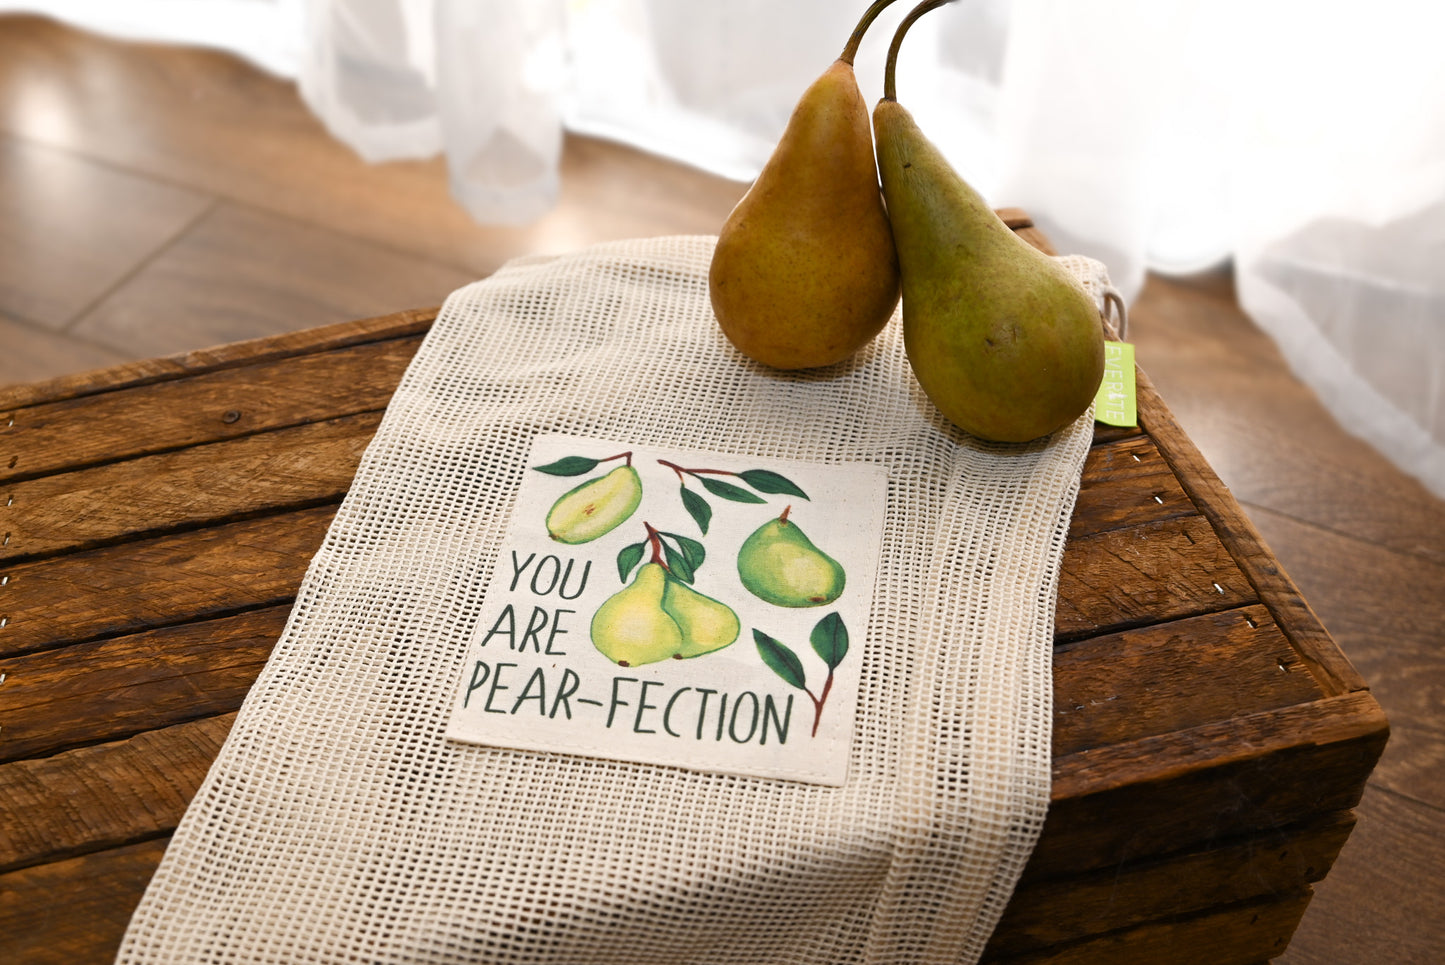 Reusable Produce Bag - You Are Pear-fection